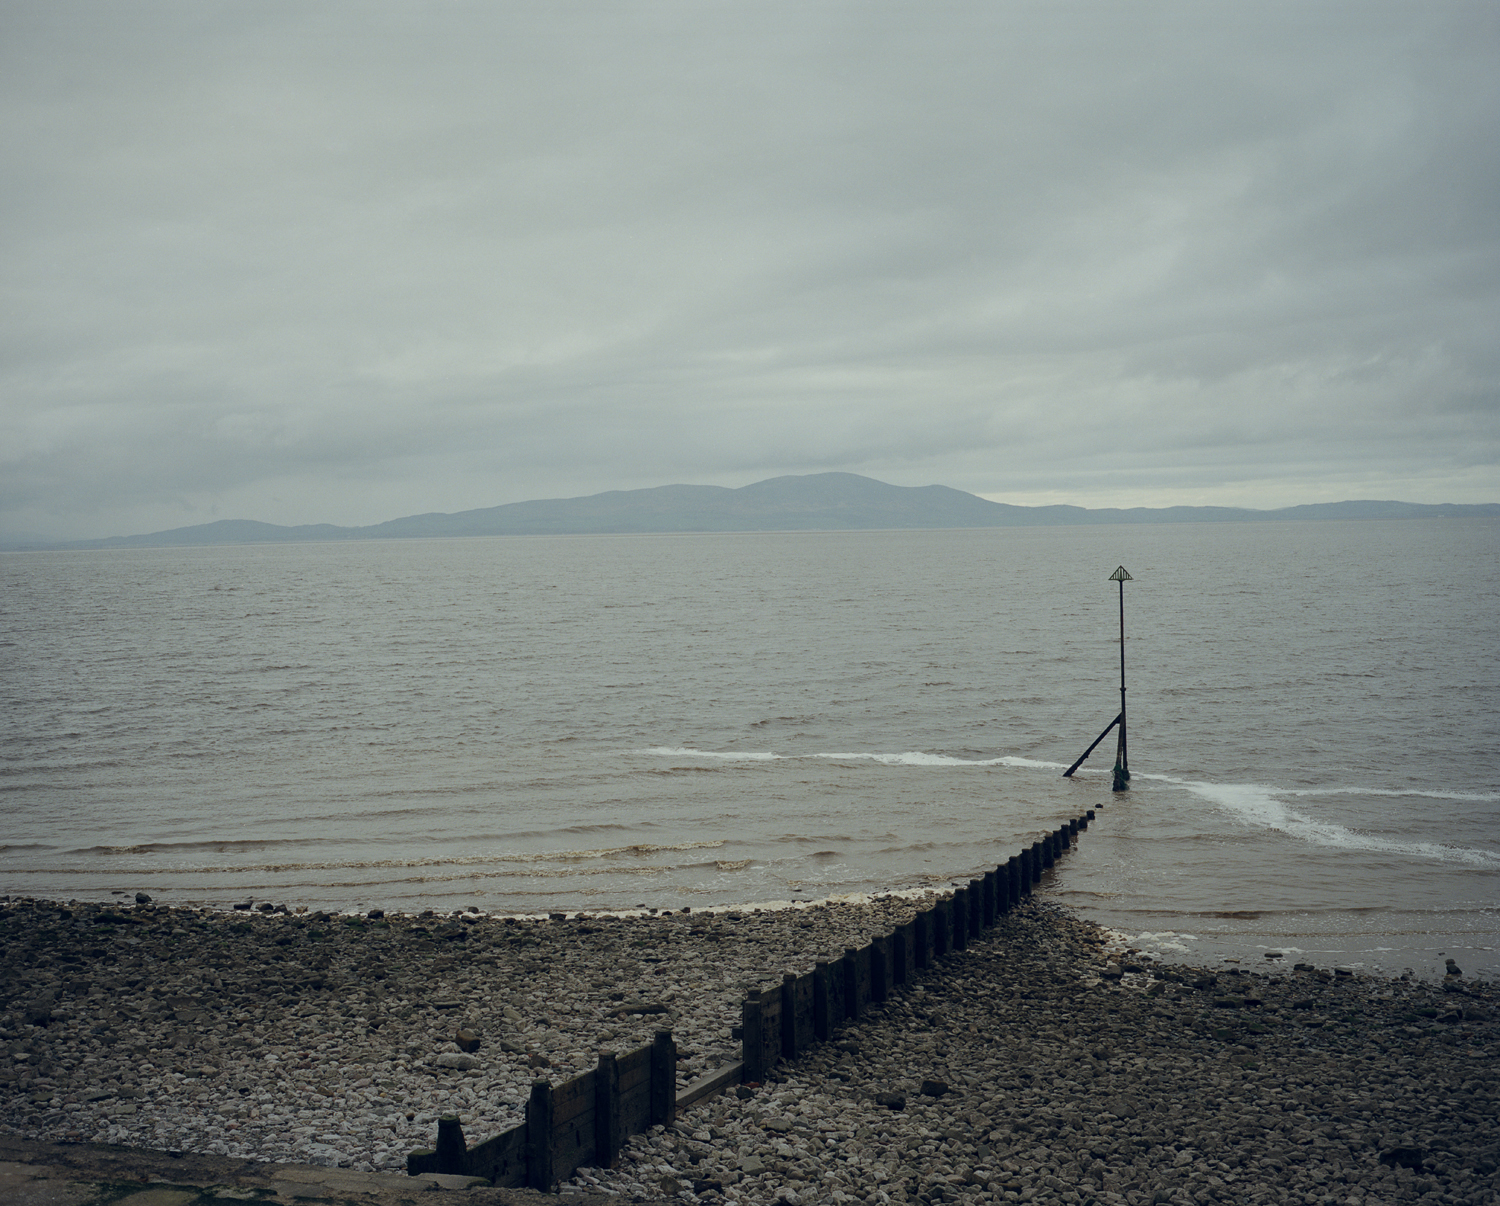 Looking at the hills of Dumfriesshire in Scotland from Cumbria, England, across the Solway Firth.